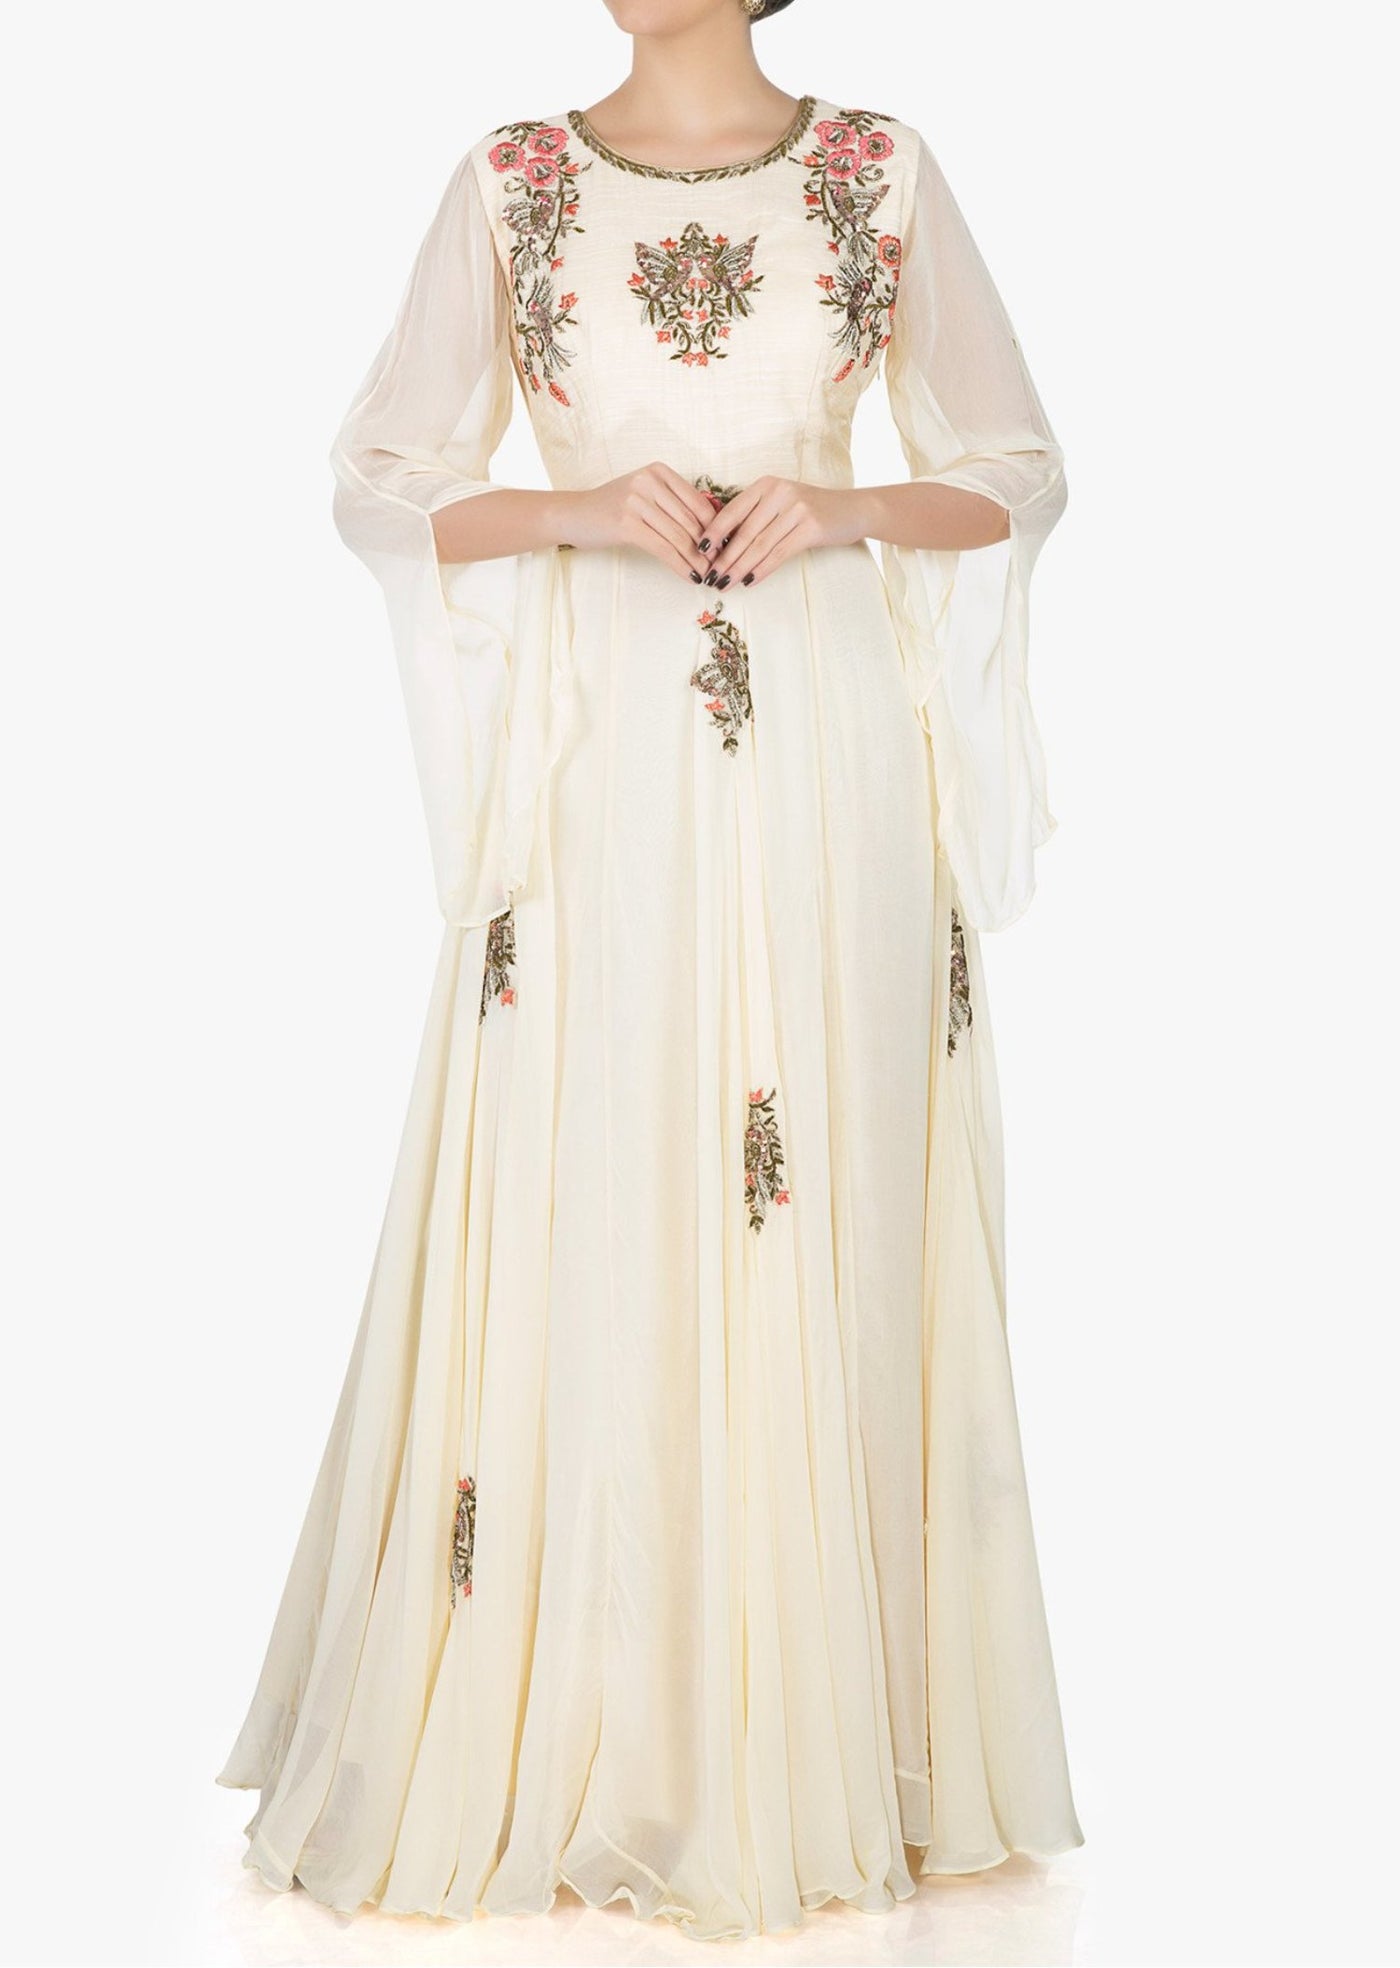 Off-white georgette dress beautified in zardosi and resham work only - Indian Clothing in Denver, CO, Aurora, CO, Boulder, CO, Fort Collins, CO, Colorado Springs, CO, Parker, CO, Highlands Ranch, CO, Cherry Creek, CO, Centennial, CO, and Longmont, CO. Nationwide shipping USA - India Fashion X